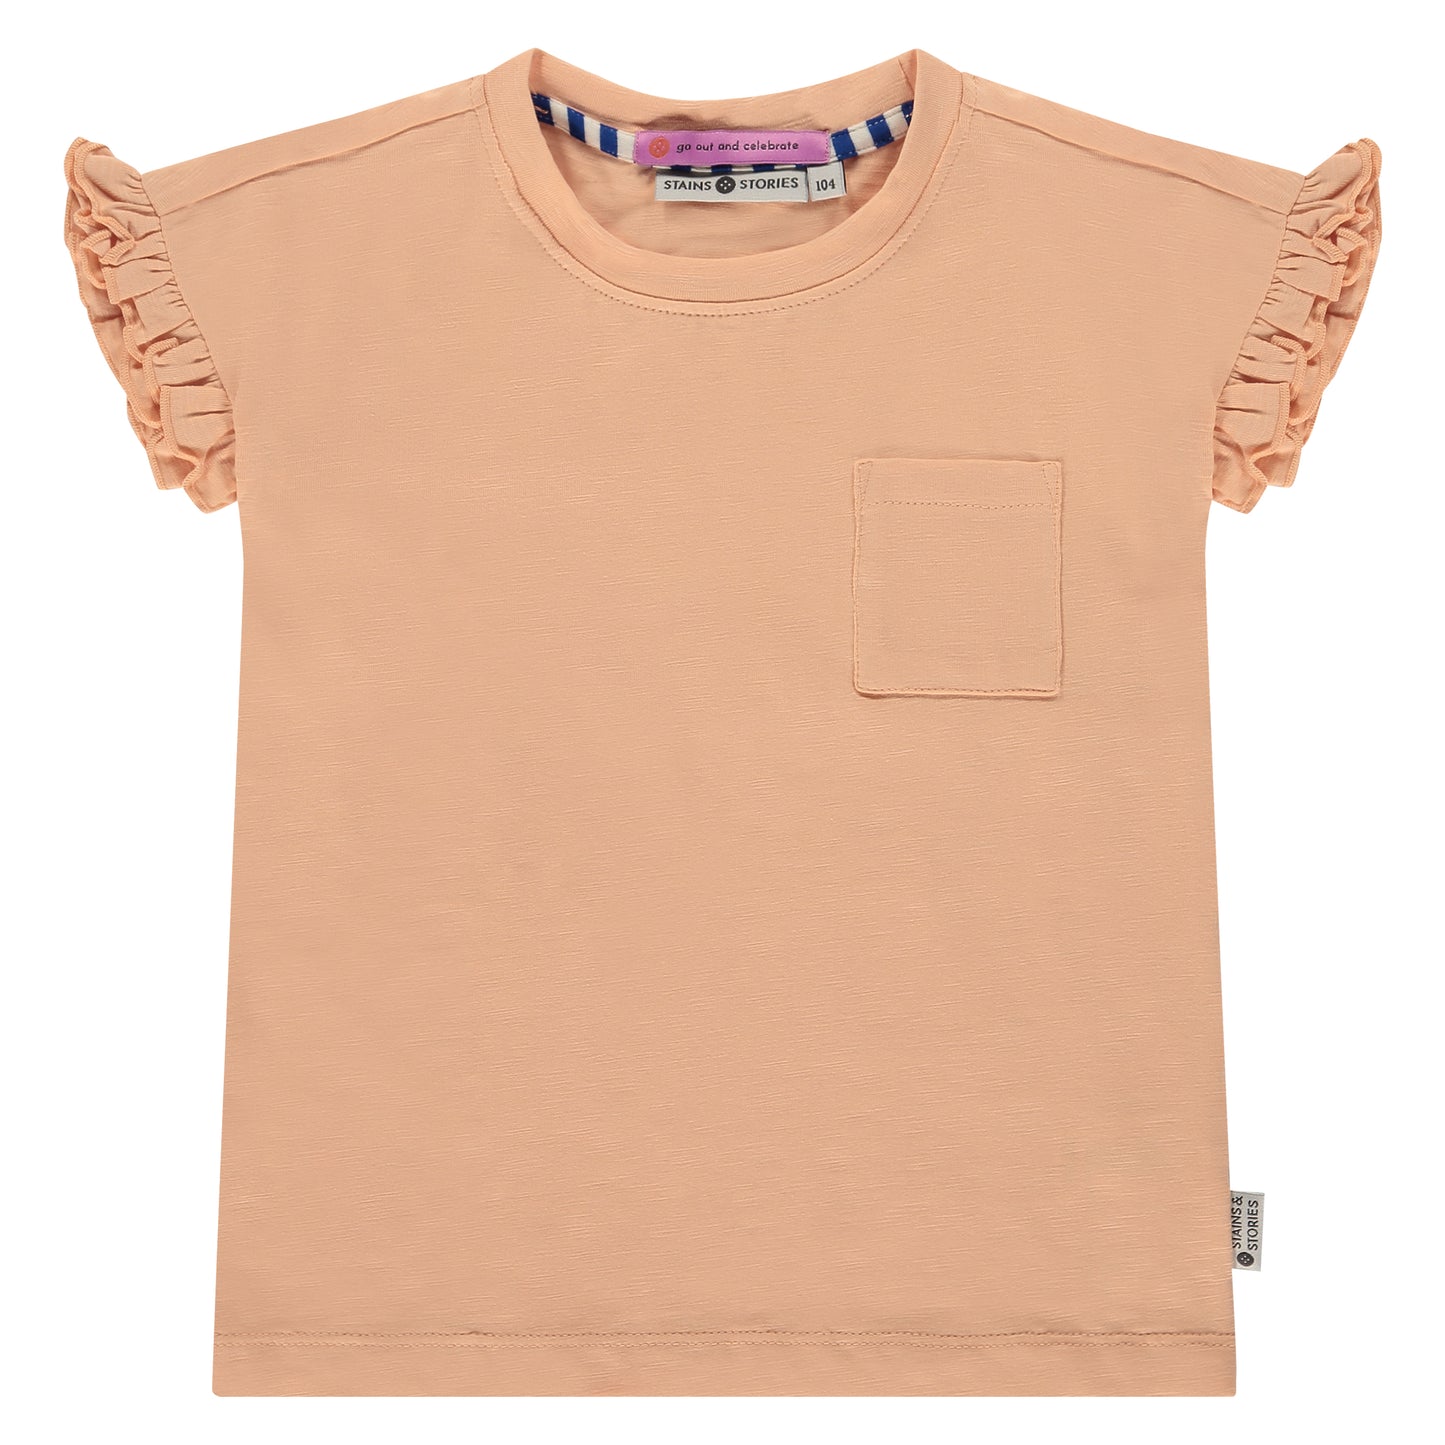 Stains & Stories Shirt - Salmon